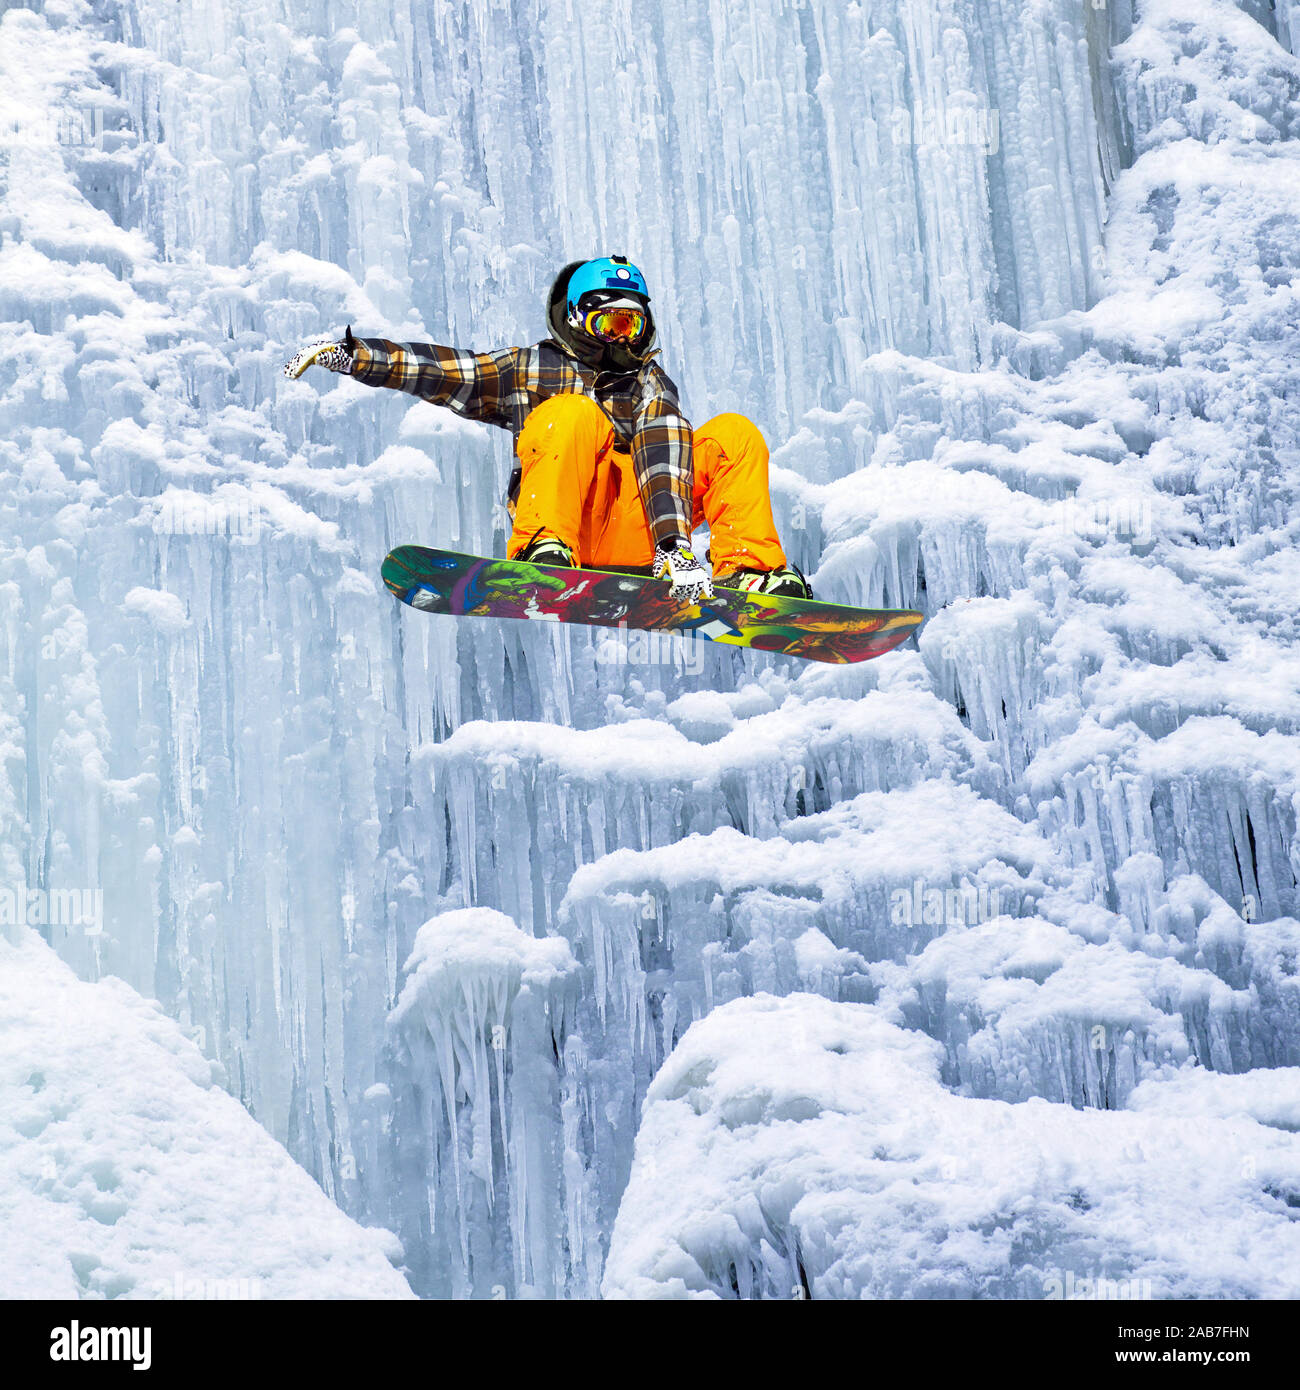 snowboarder jump of the icefall Stock Photo